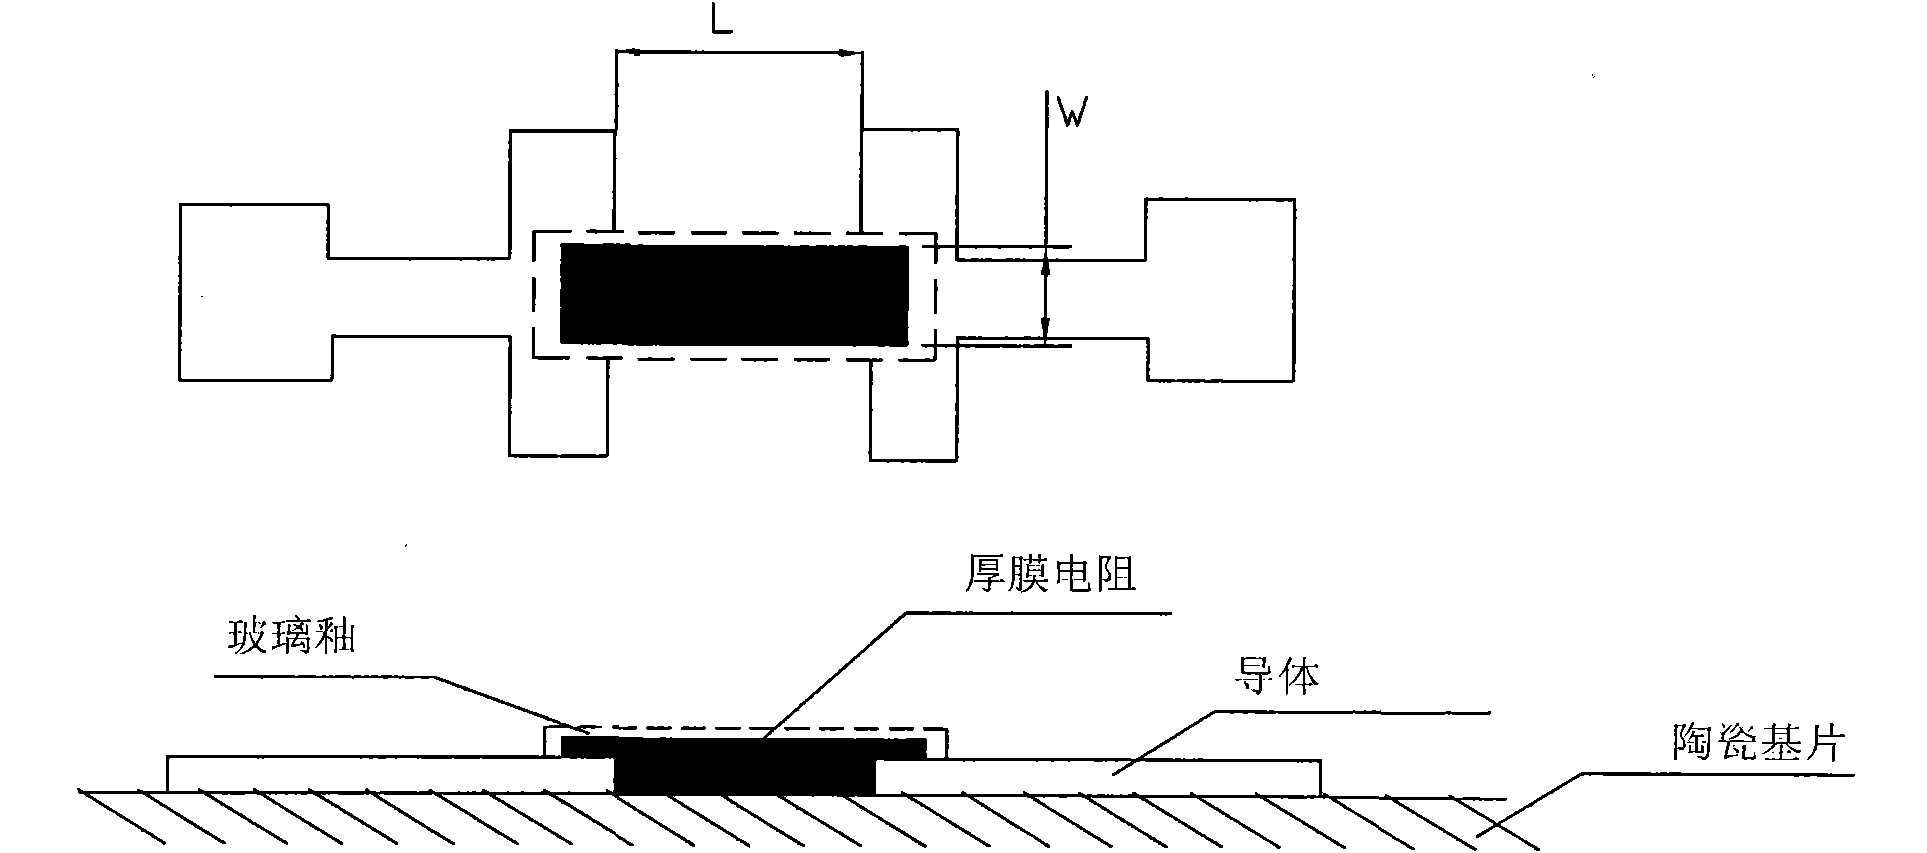 Thick-film resistor layout design device